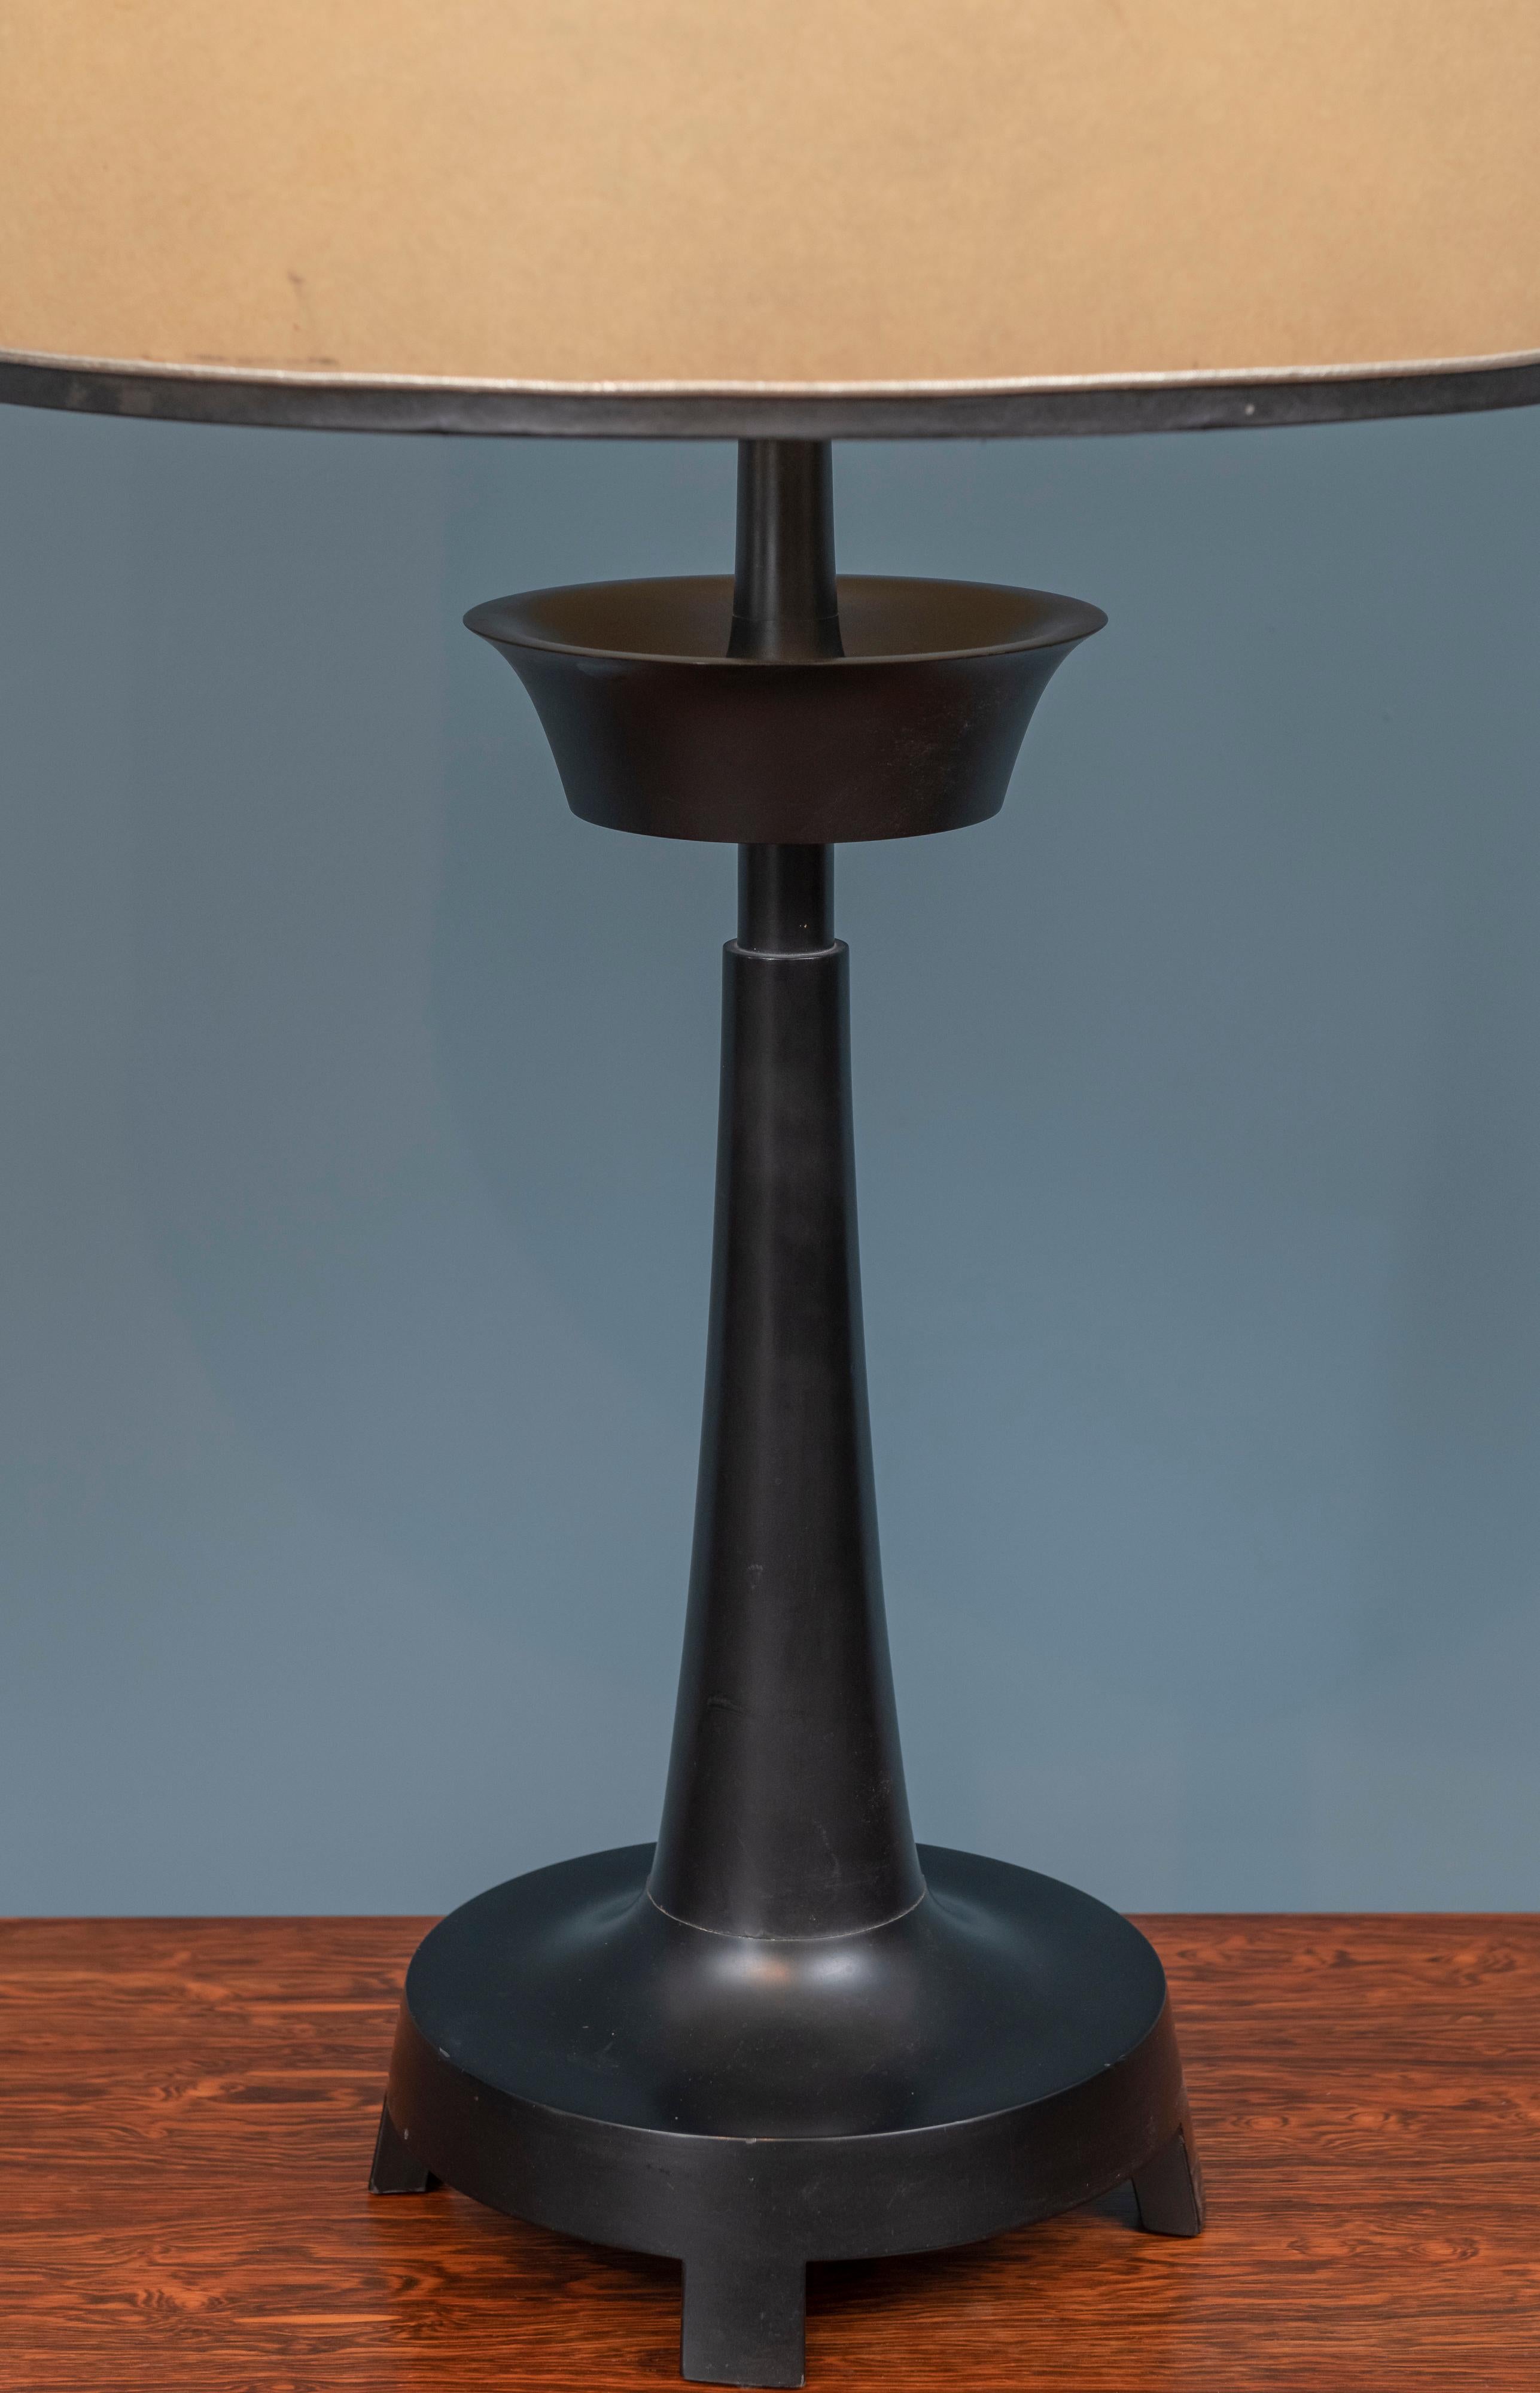 Mid-Century Modern monumental black lacquer table lamp with its original parchment shade. Large scale turned wood table lamp with amazing matching finial! Encompassing the greatest elements of the 1950s-1960s with over the top elements of the 1950s